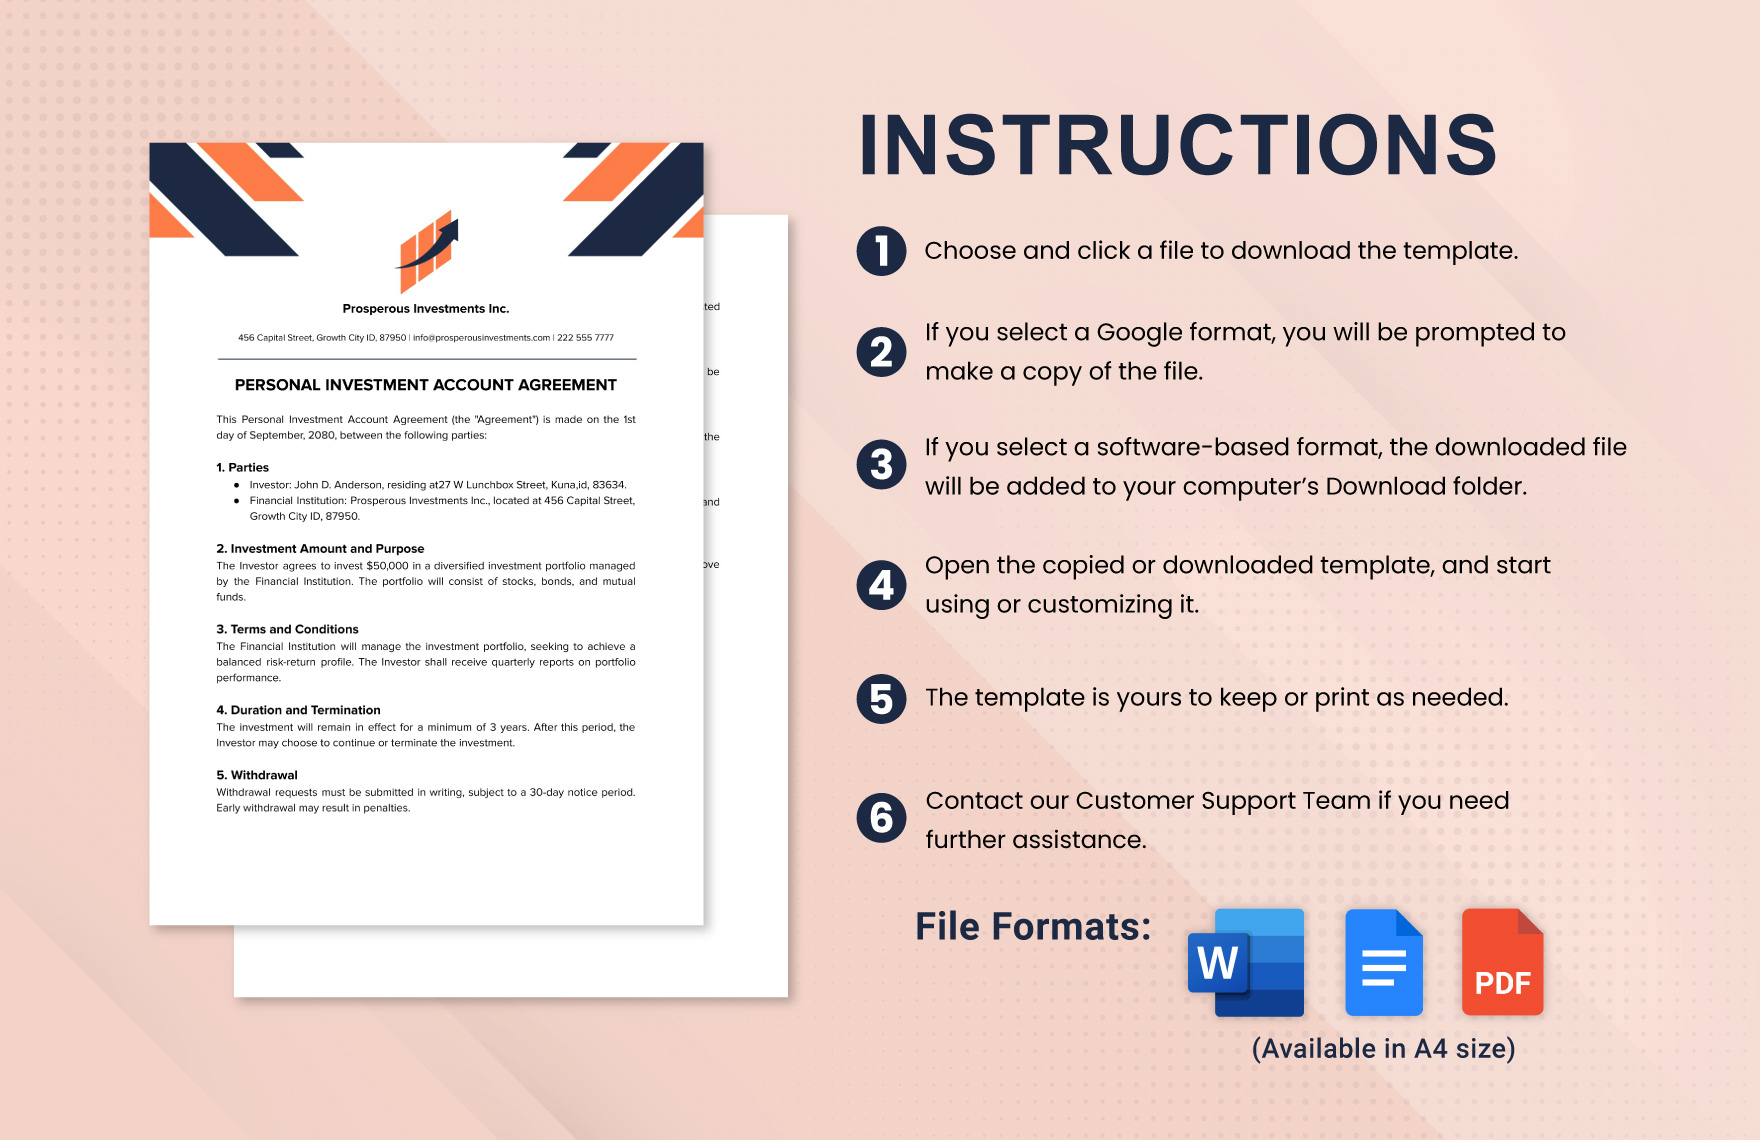 Personal Investment Account Agreement Template